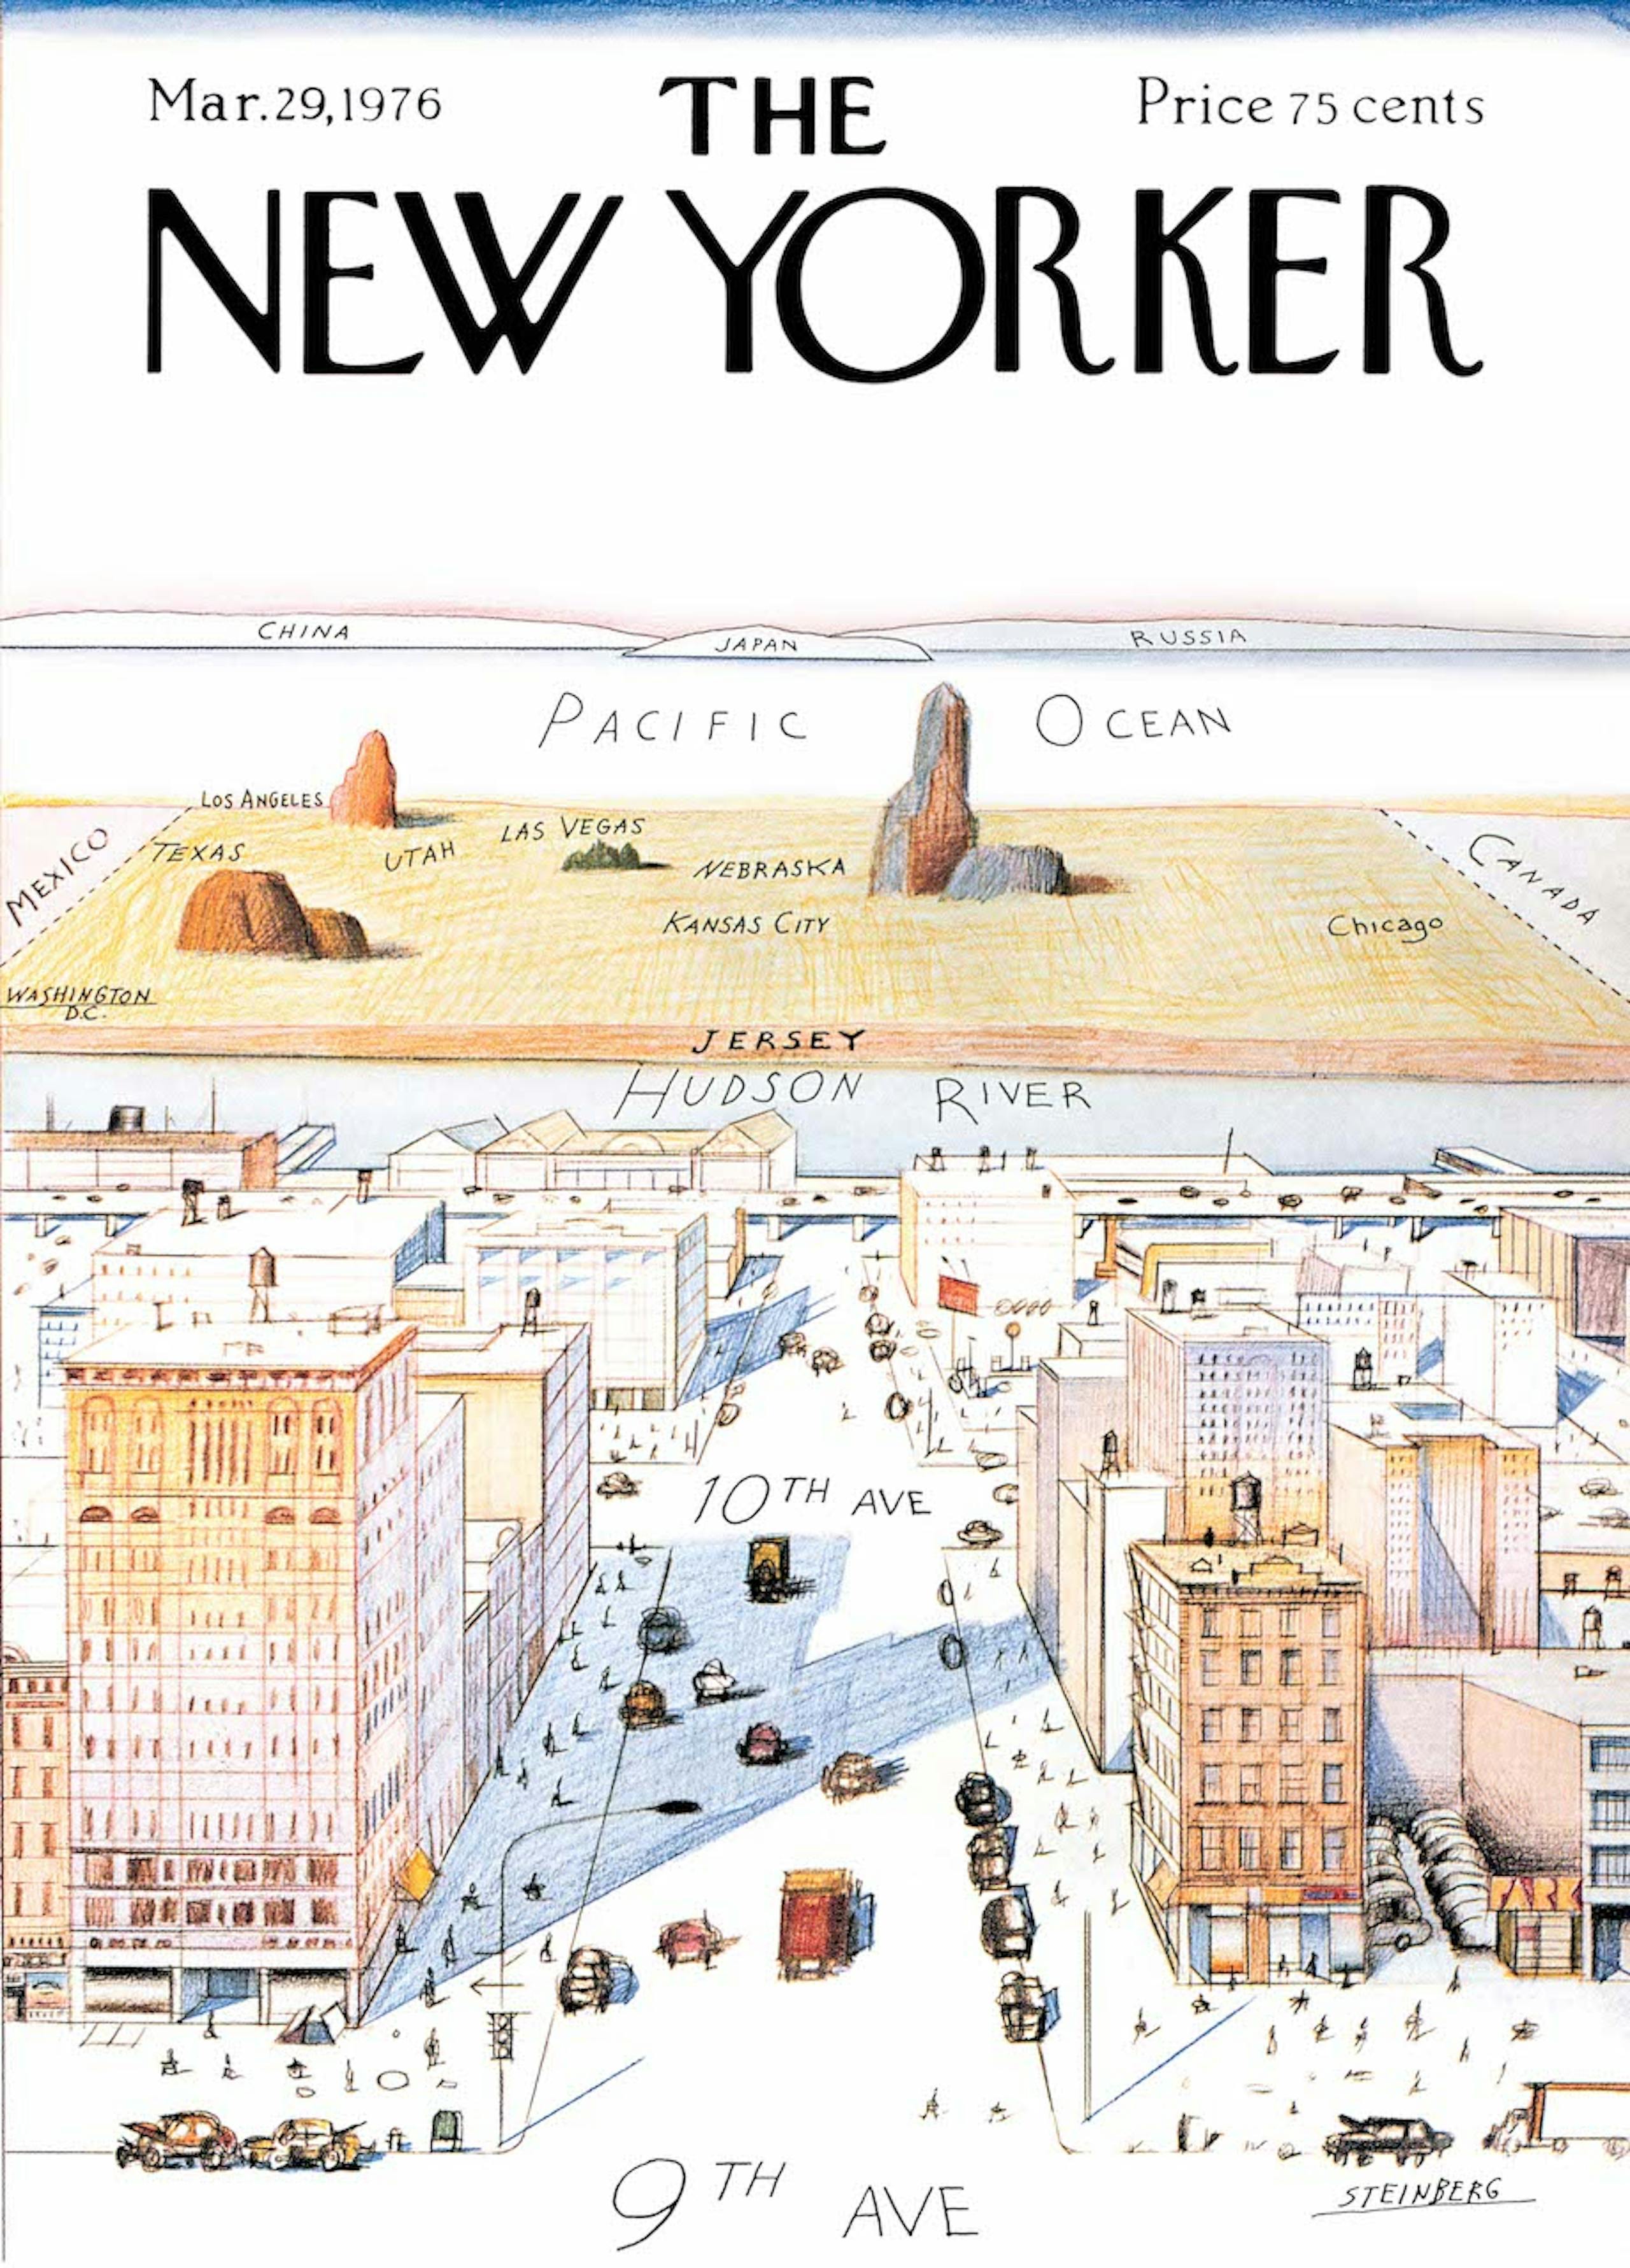 Saul Steinberg, Cover of The New Yorker, Mar.29, 1976 © The Saul Steinberg Foundation /Artists Rights Society (ARS), New York 